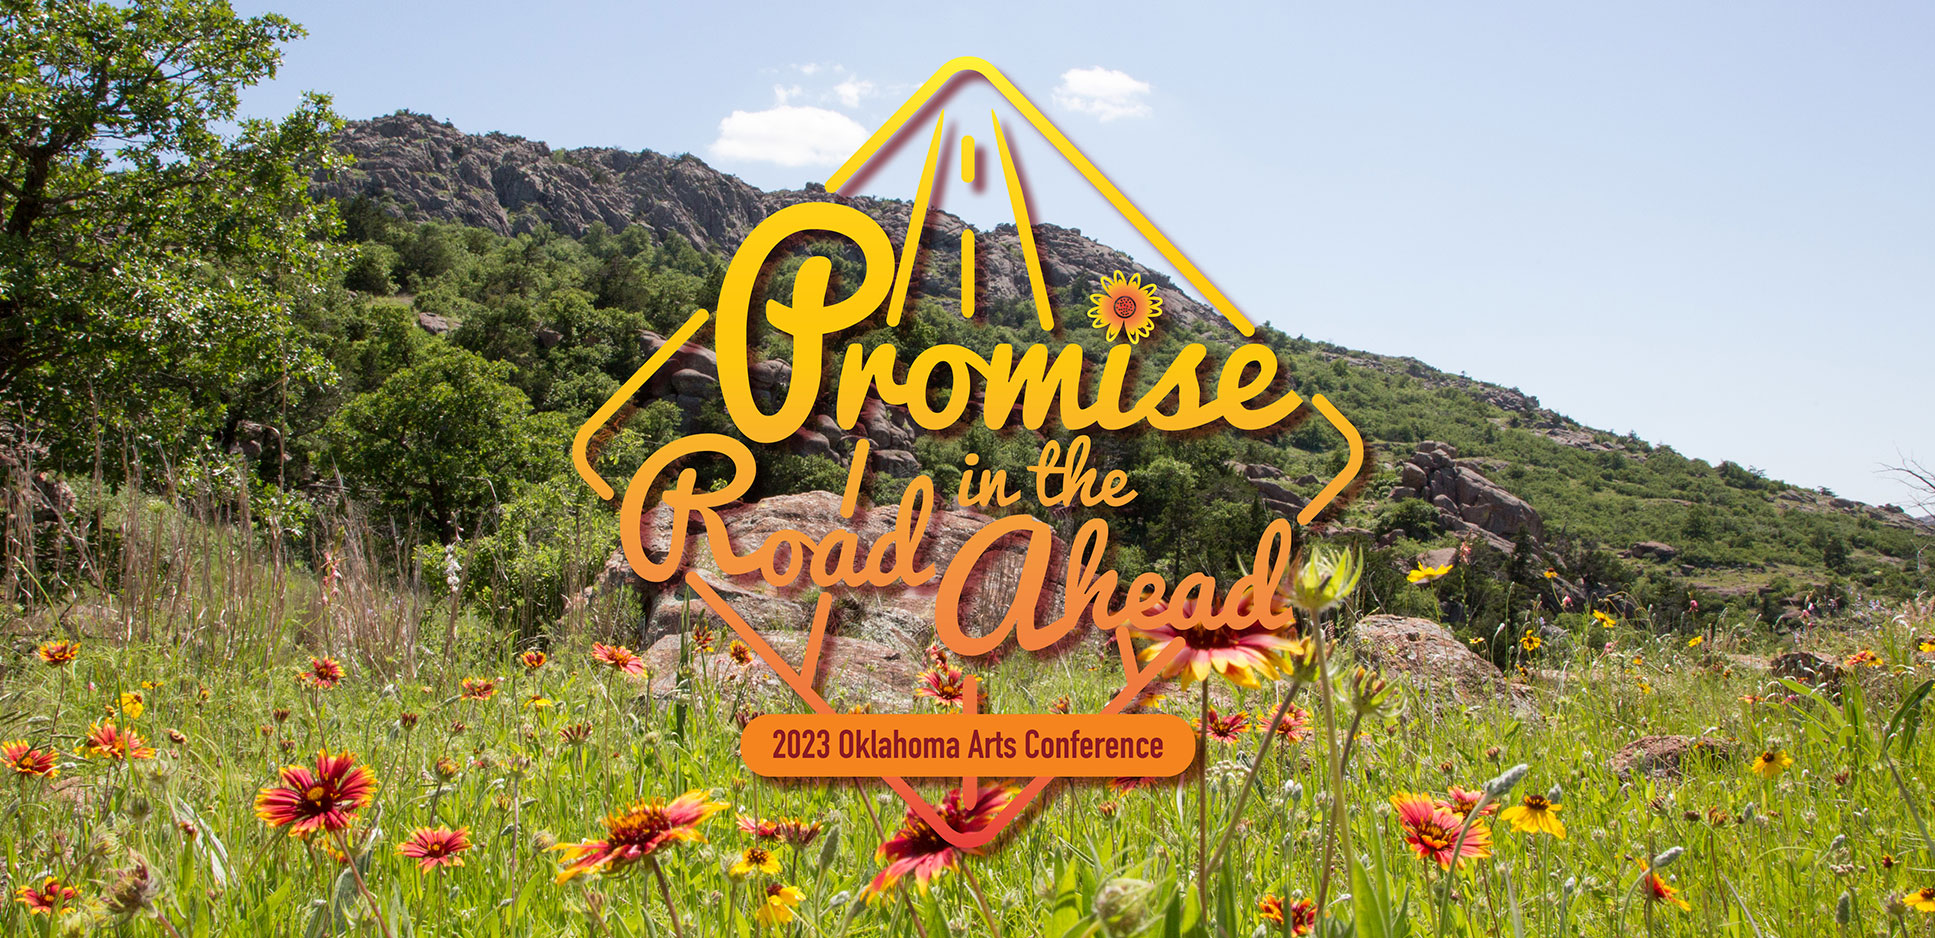 Register for the 2023 Oklahoma Arts Conference